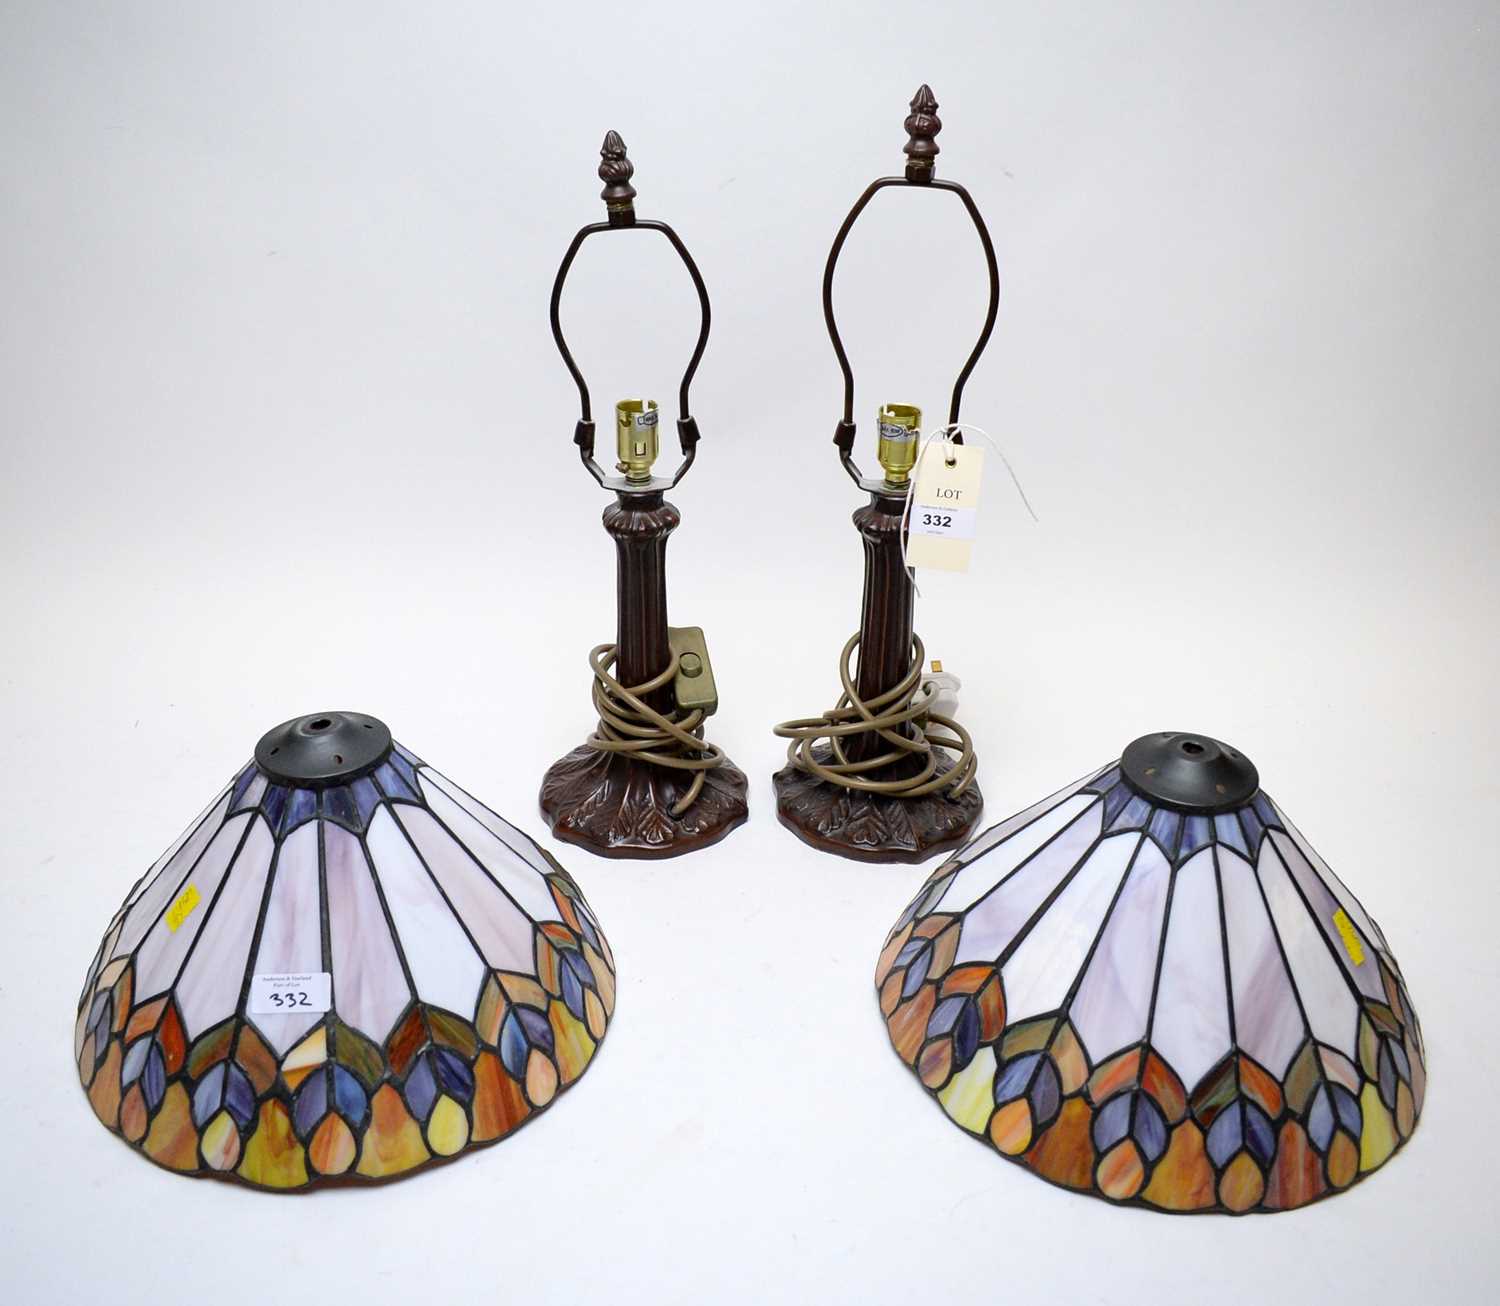 Lot 332 - Pair of Tiffany style table lamps